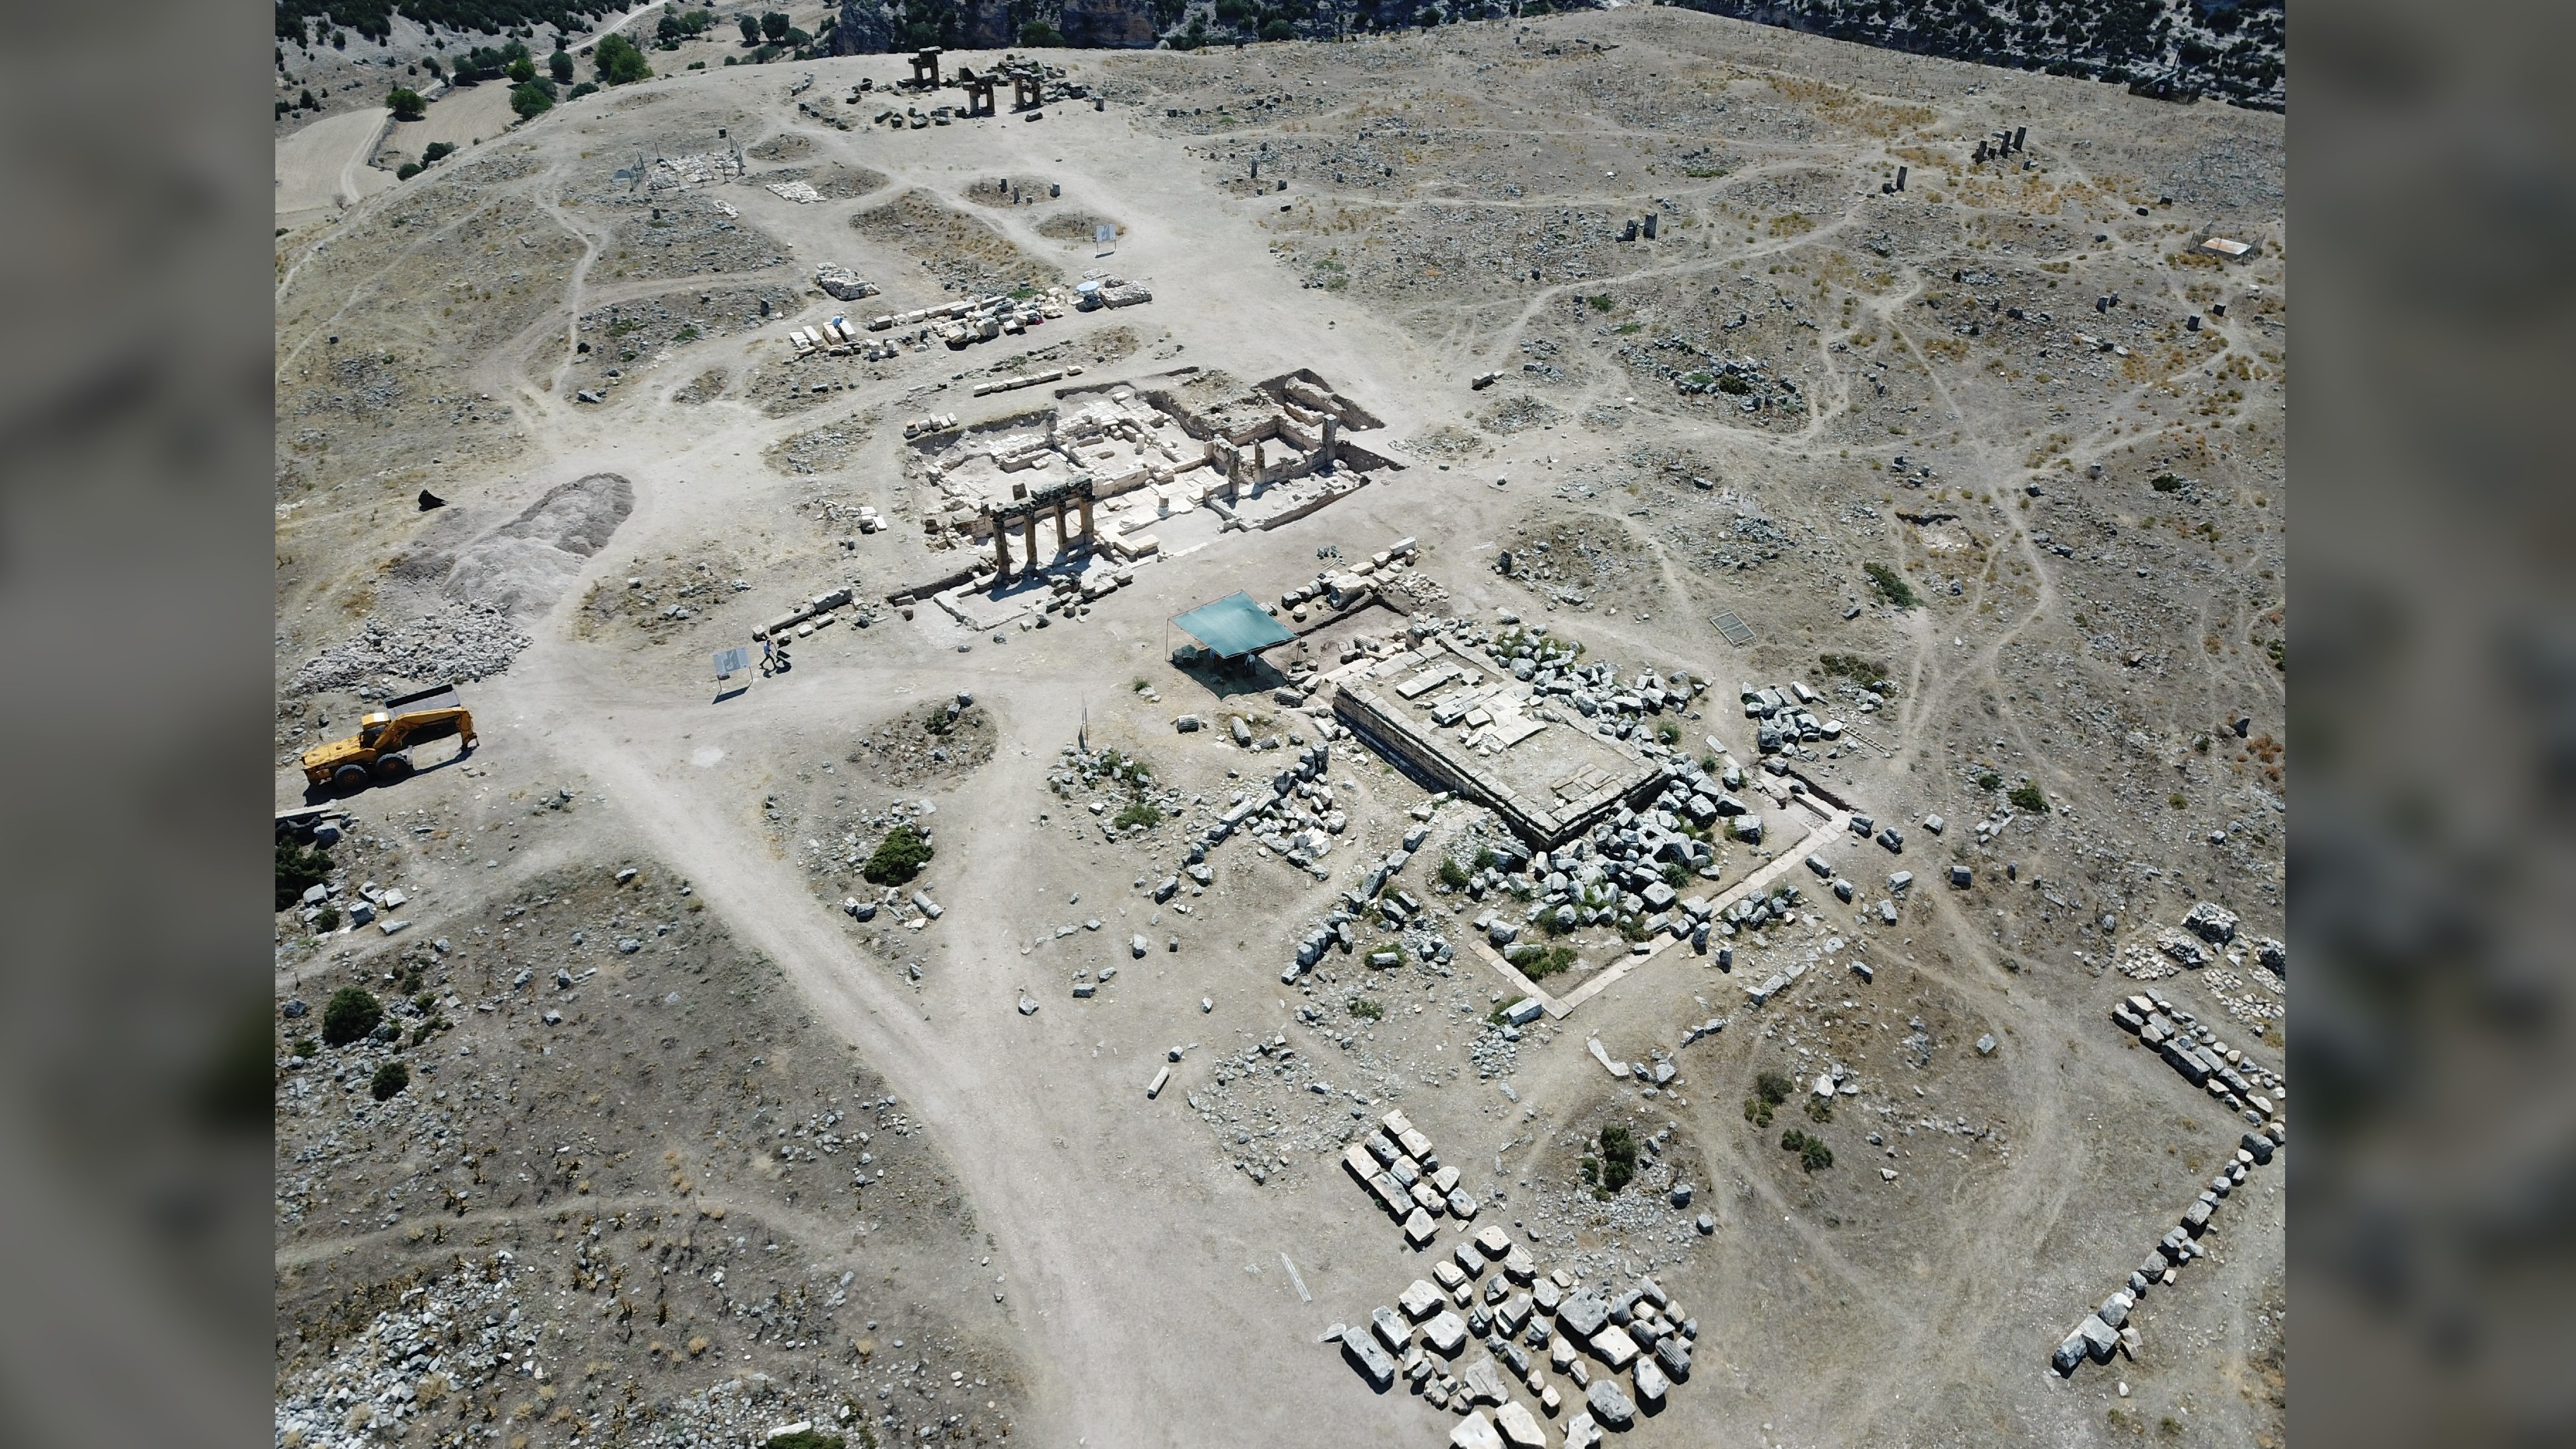 A bird's-eye view of the archaeological site at Blaundos.